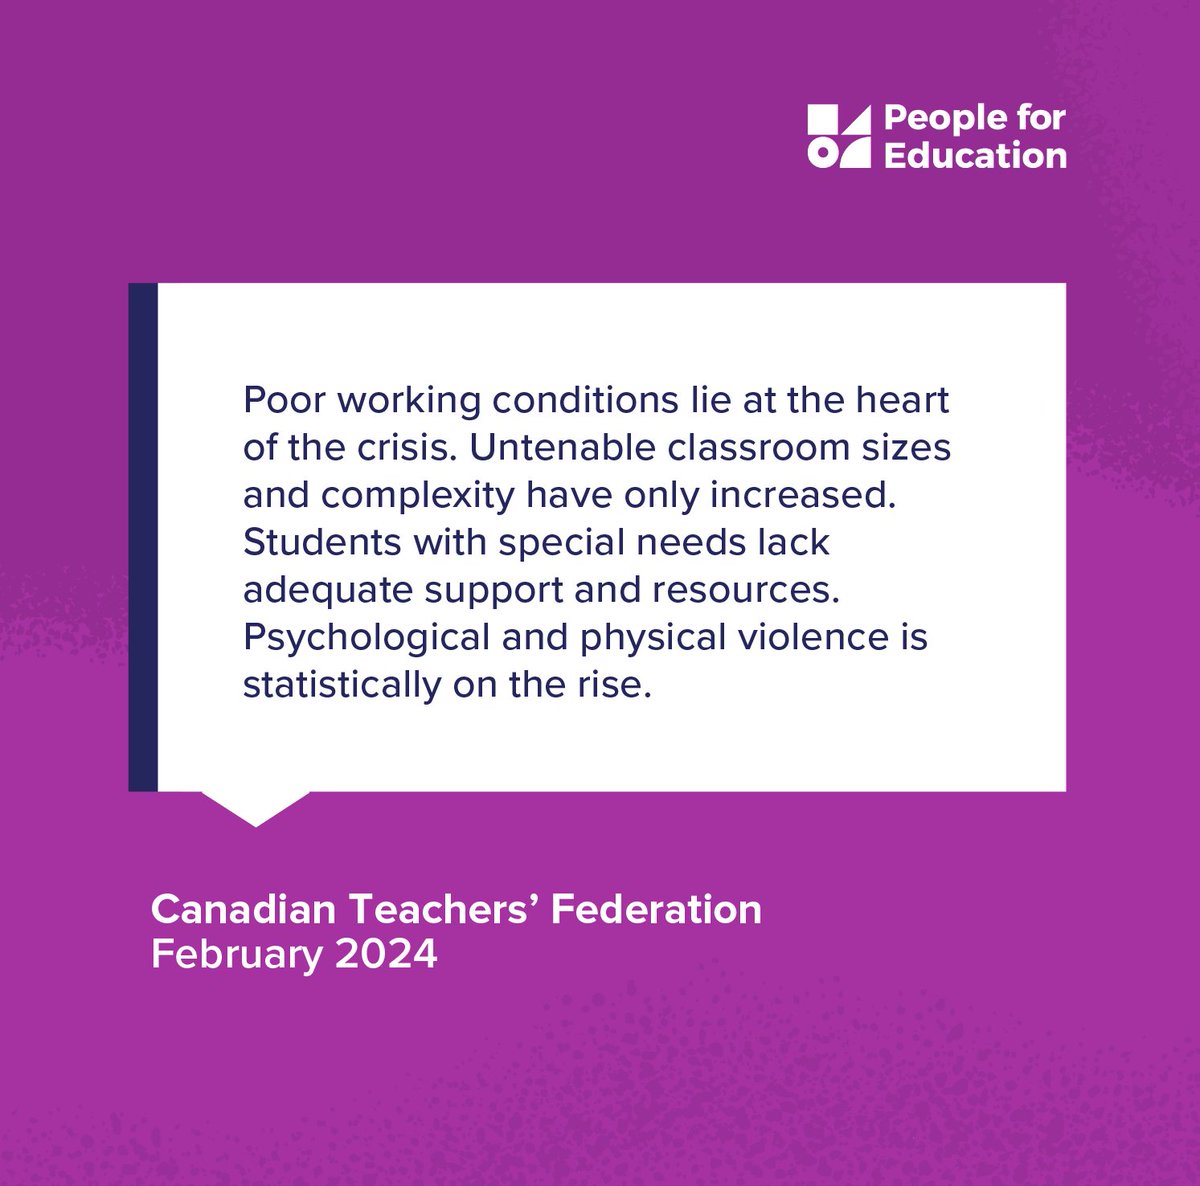 Recent data from our 2023-24 annual Ontario school survey shows that staff shortages are an issue across the province. In fact, more than a quarter of Ontario’s schools experience teacher shortages every day. More on this 👉 peopleforeducation.ca/our-work/staff…